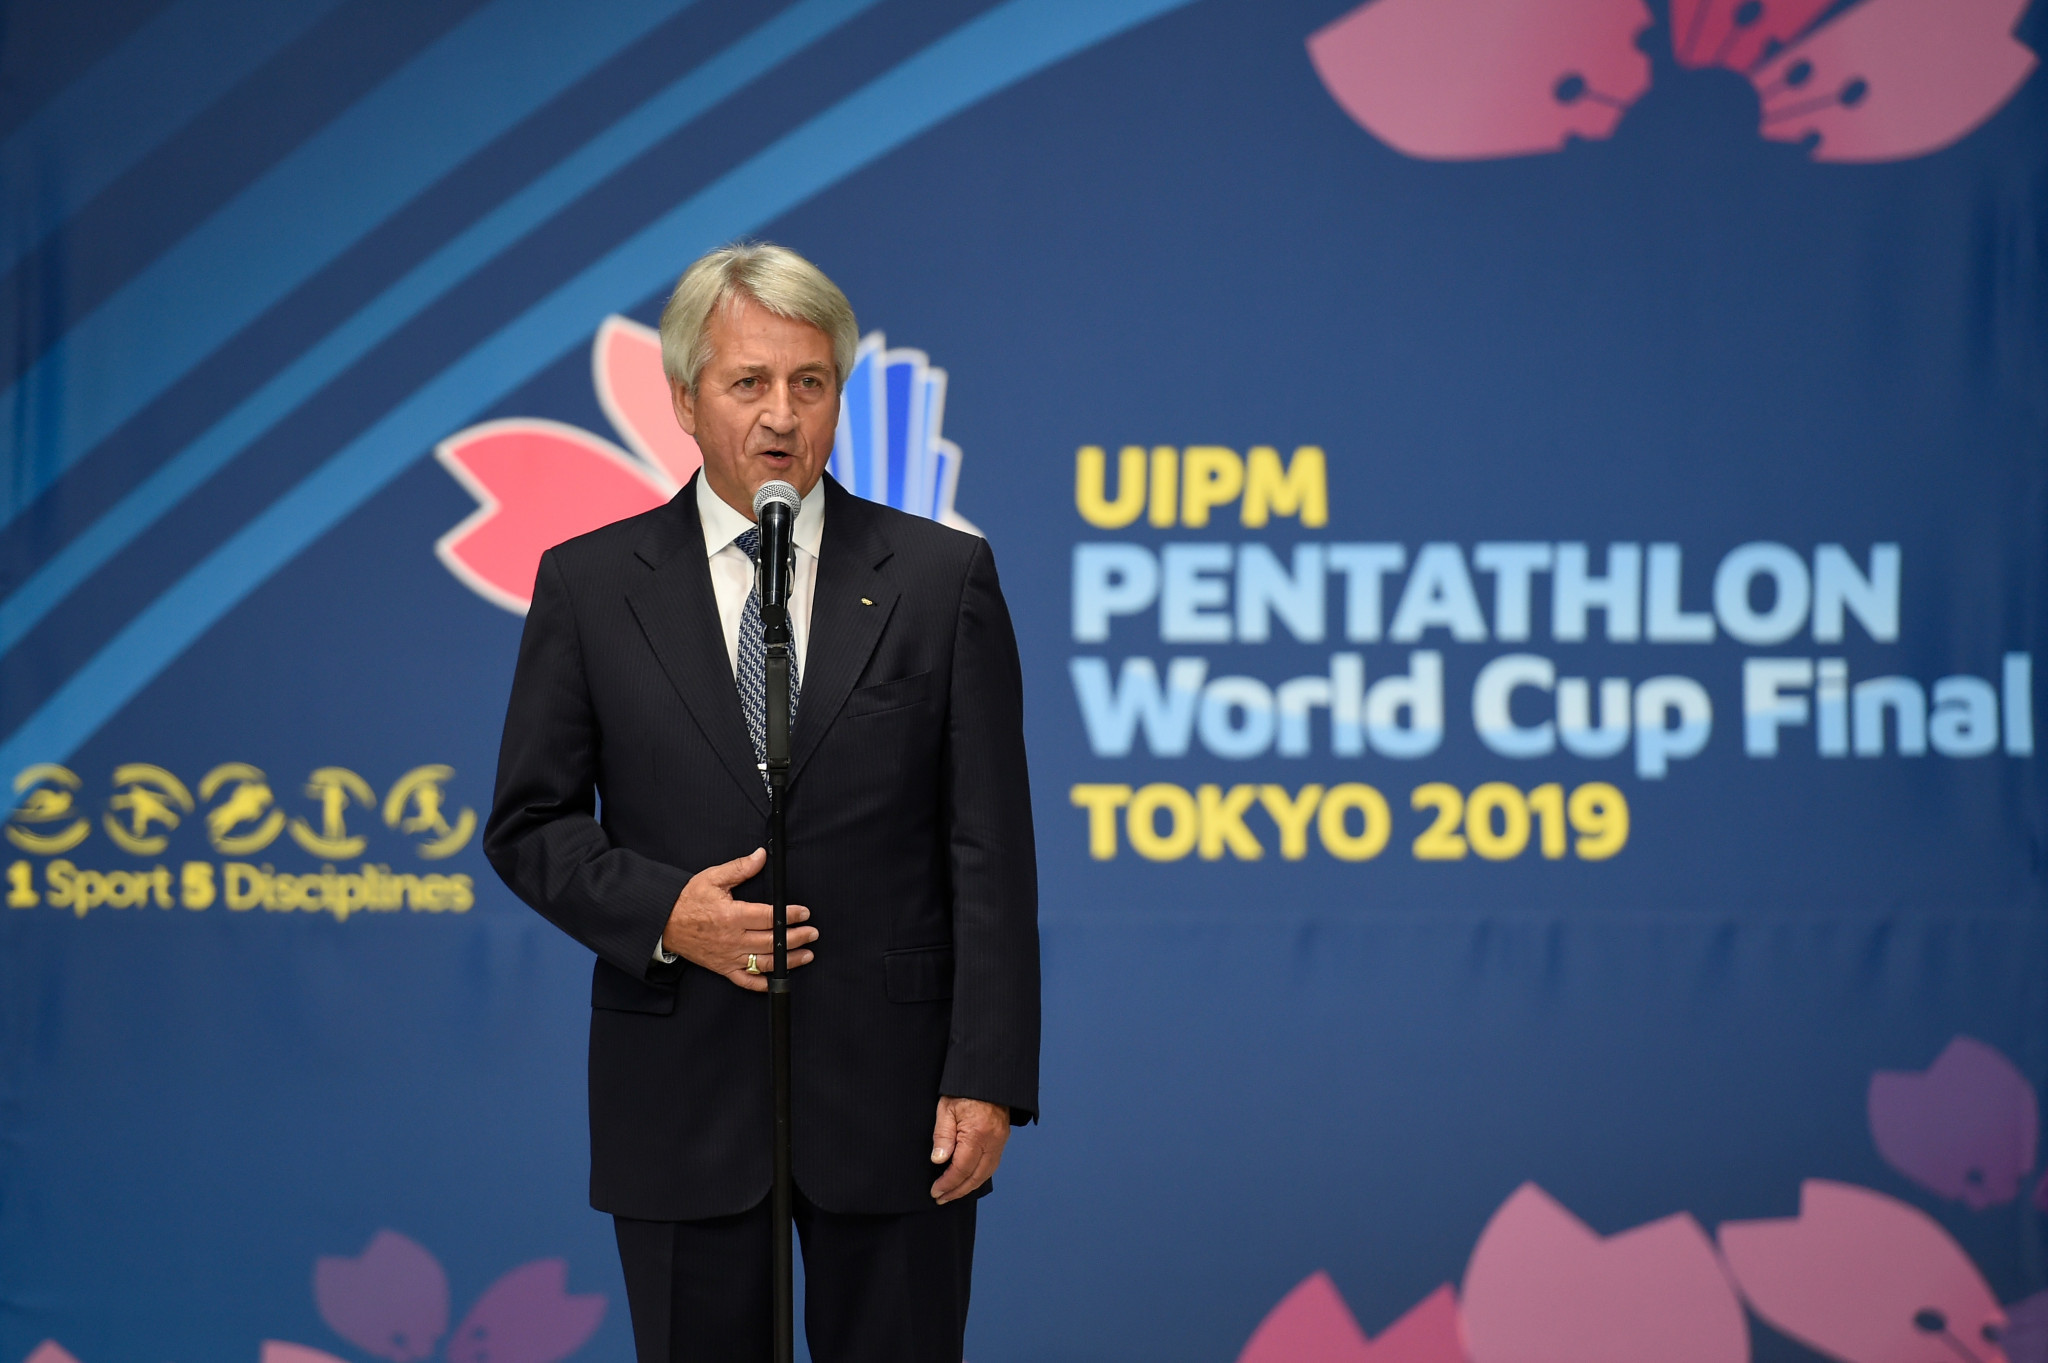 UIPM President Klaus Schormann is chairing the New Fifth Discipline Working Group, which is set to discuss proposals before the announcement of a shortlist at the end of March ©Getty Images